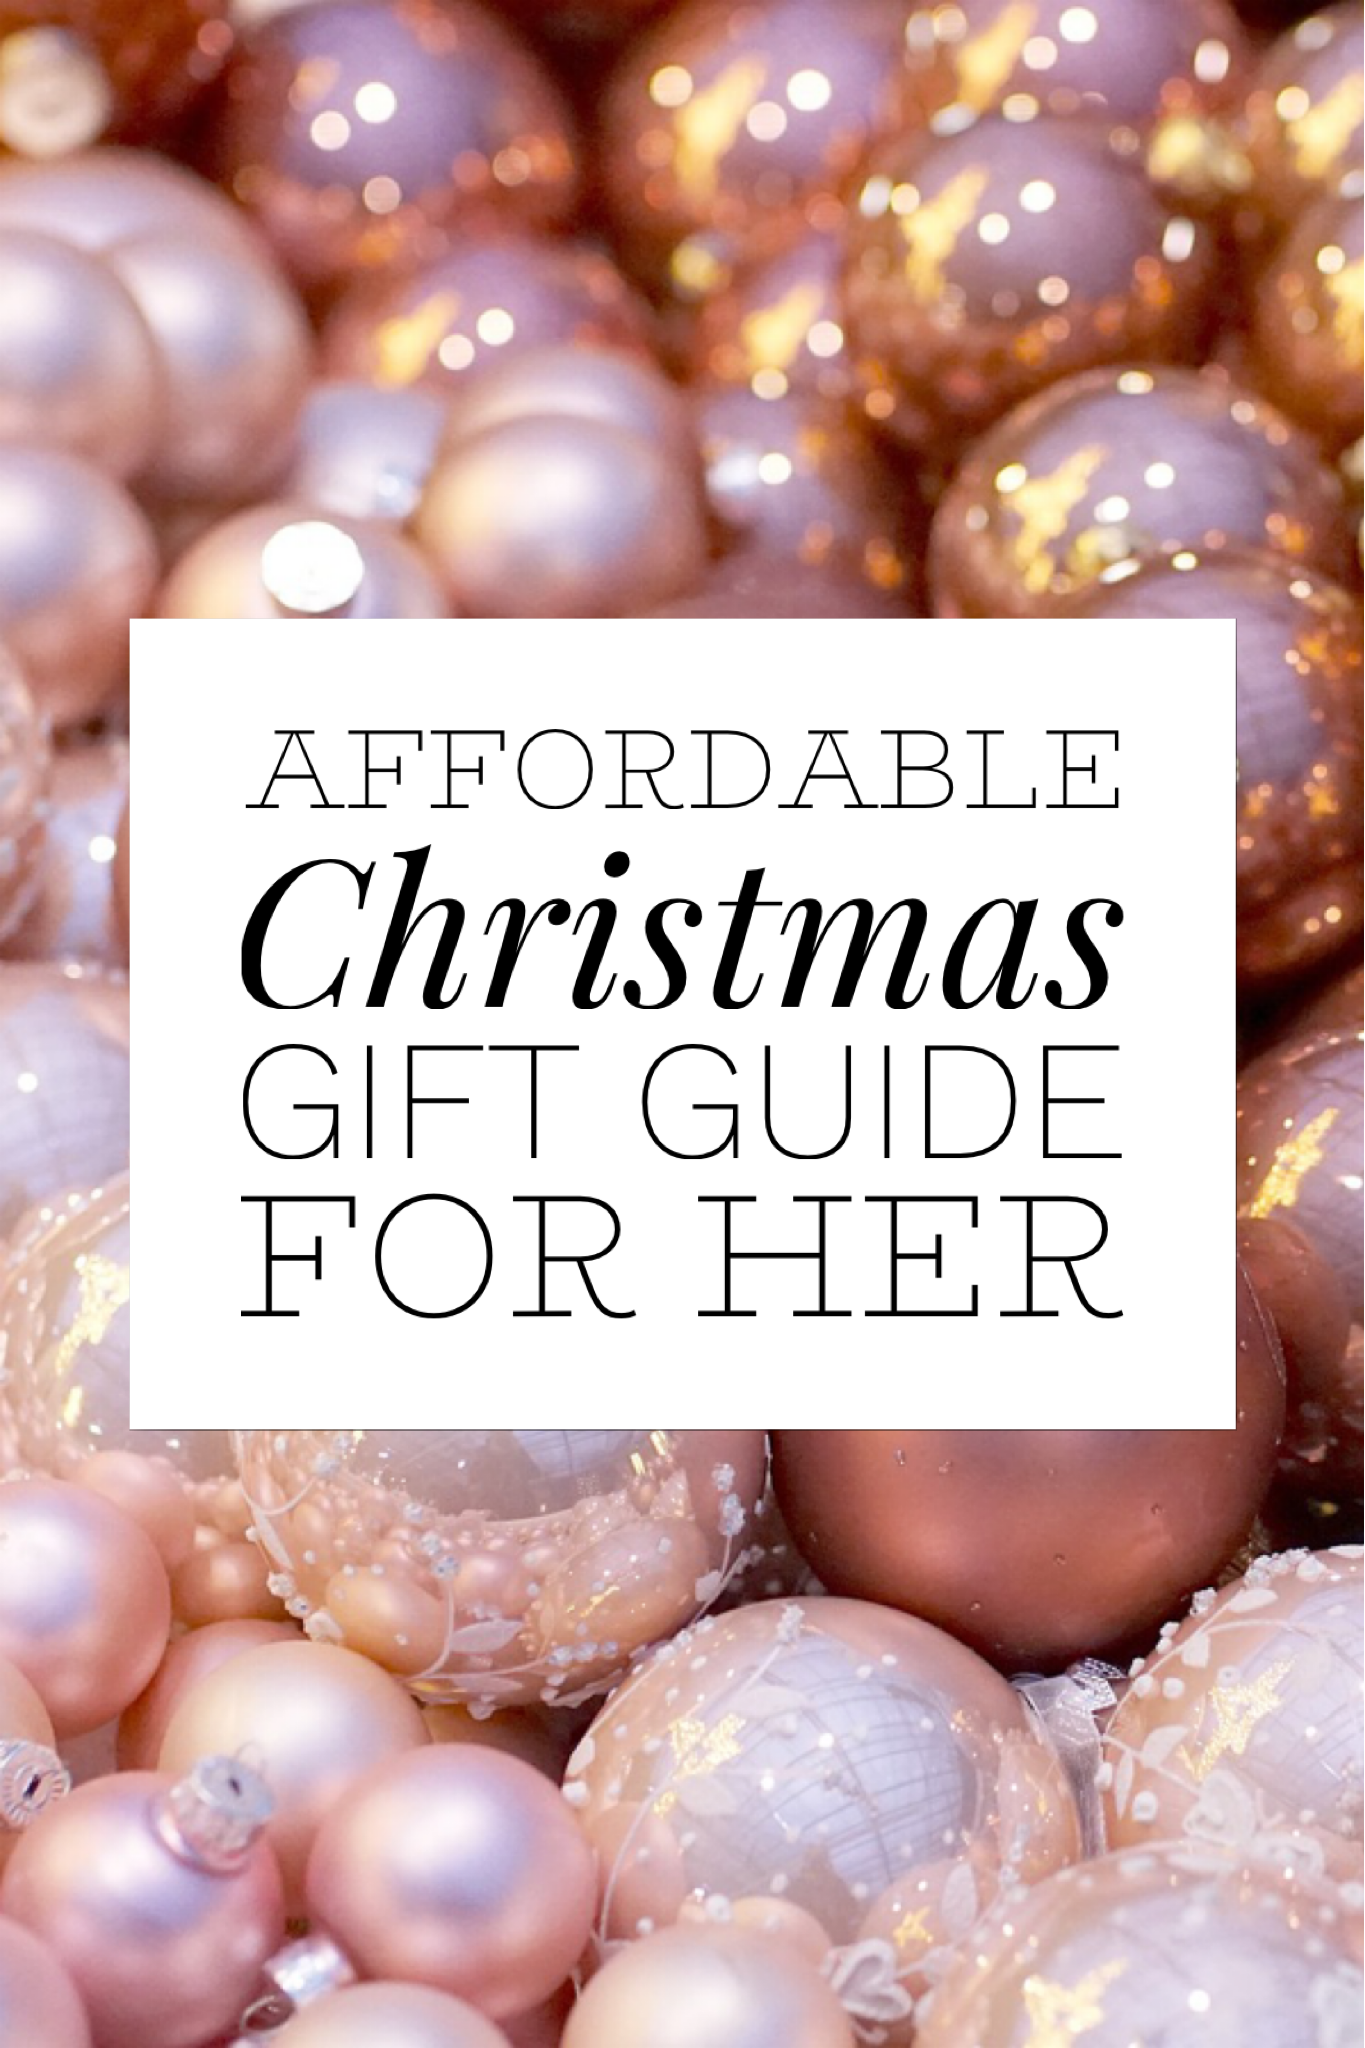 Affordable Christmas Gift Guide For Her!